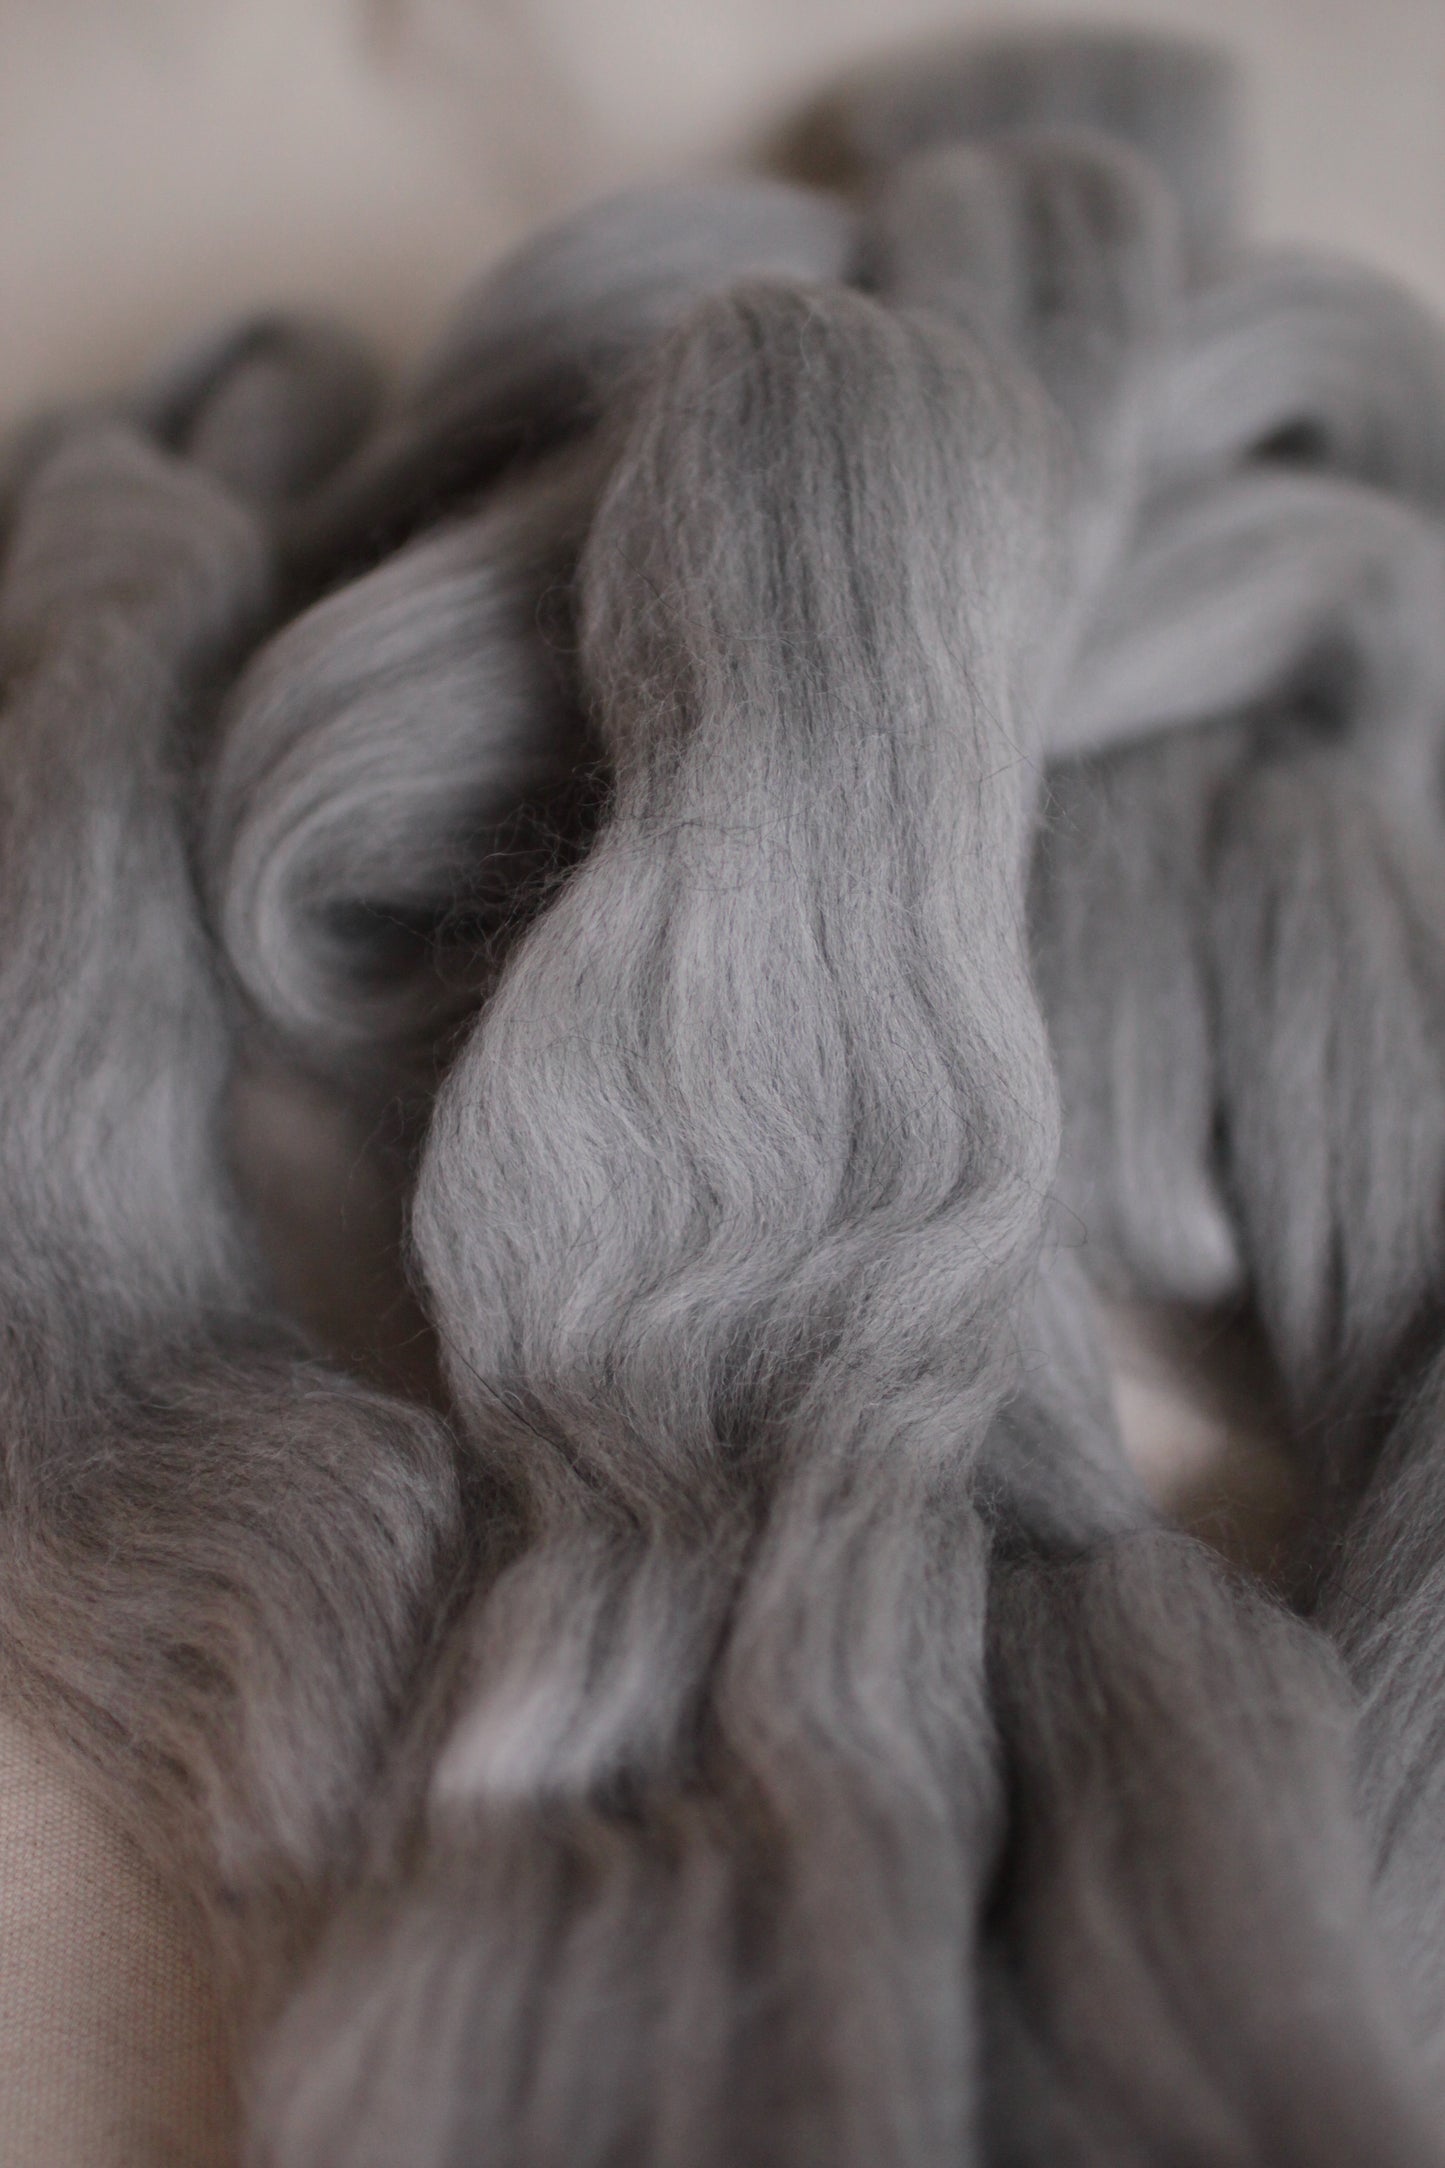 Corriedale roving/top - undyed grey spinning fibre 100 gm - bare (grey)